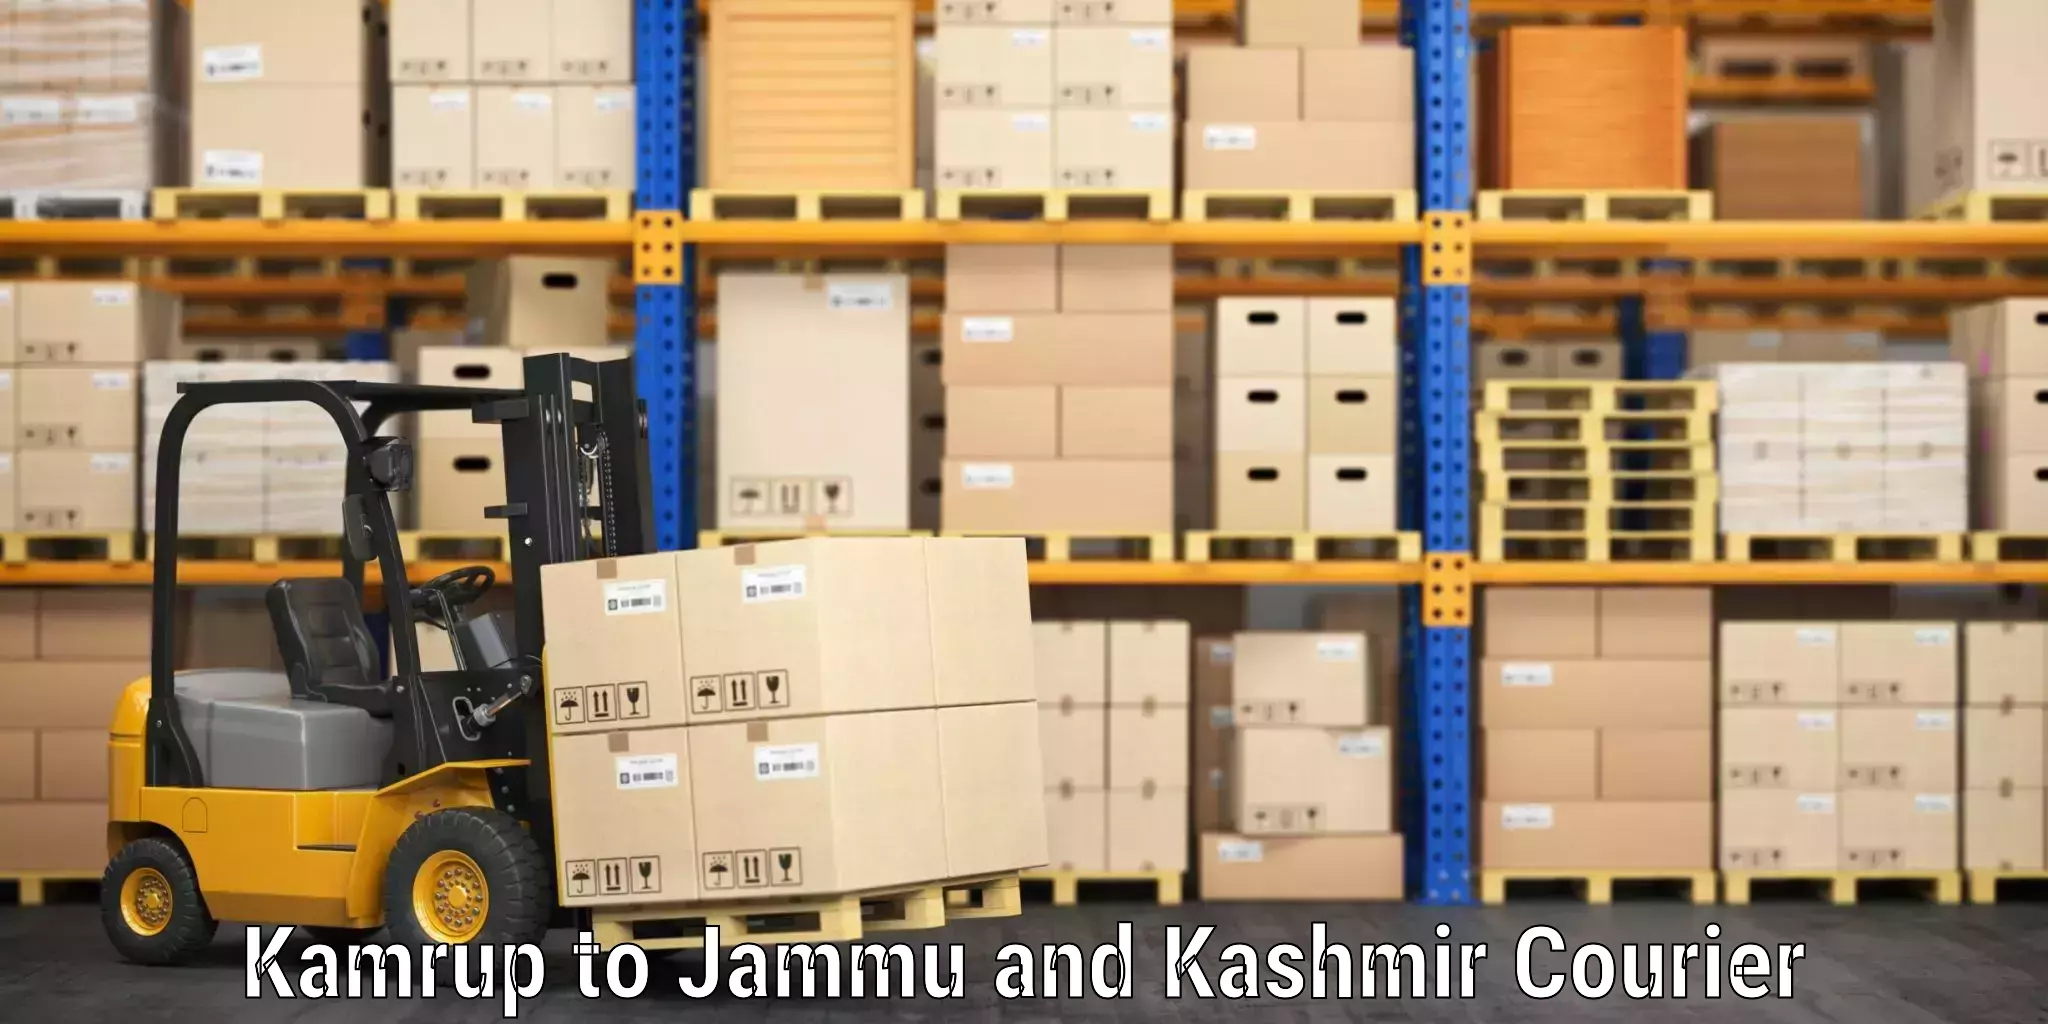 Instant baggage transport quote Kamrup to Jammu